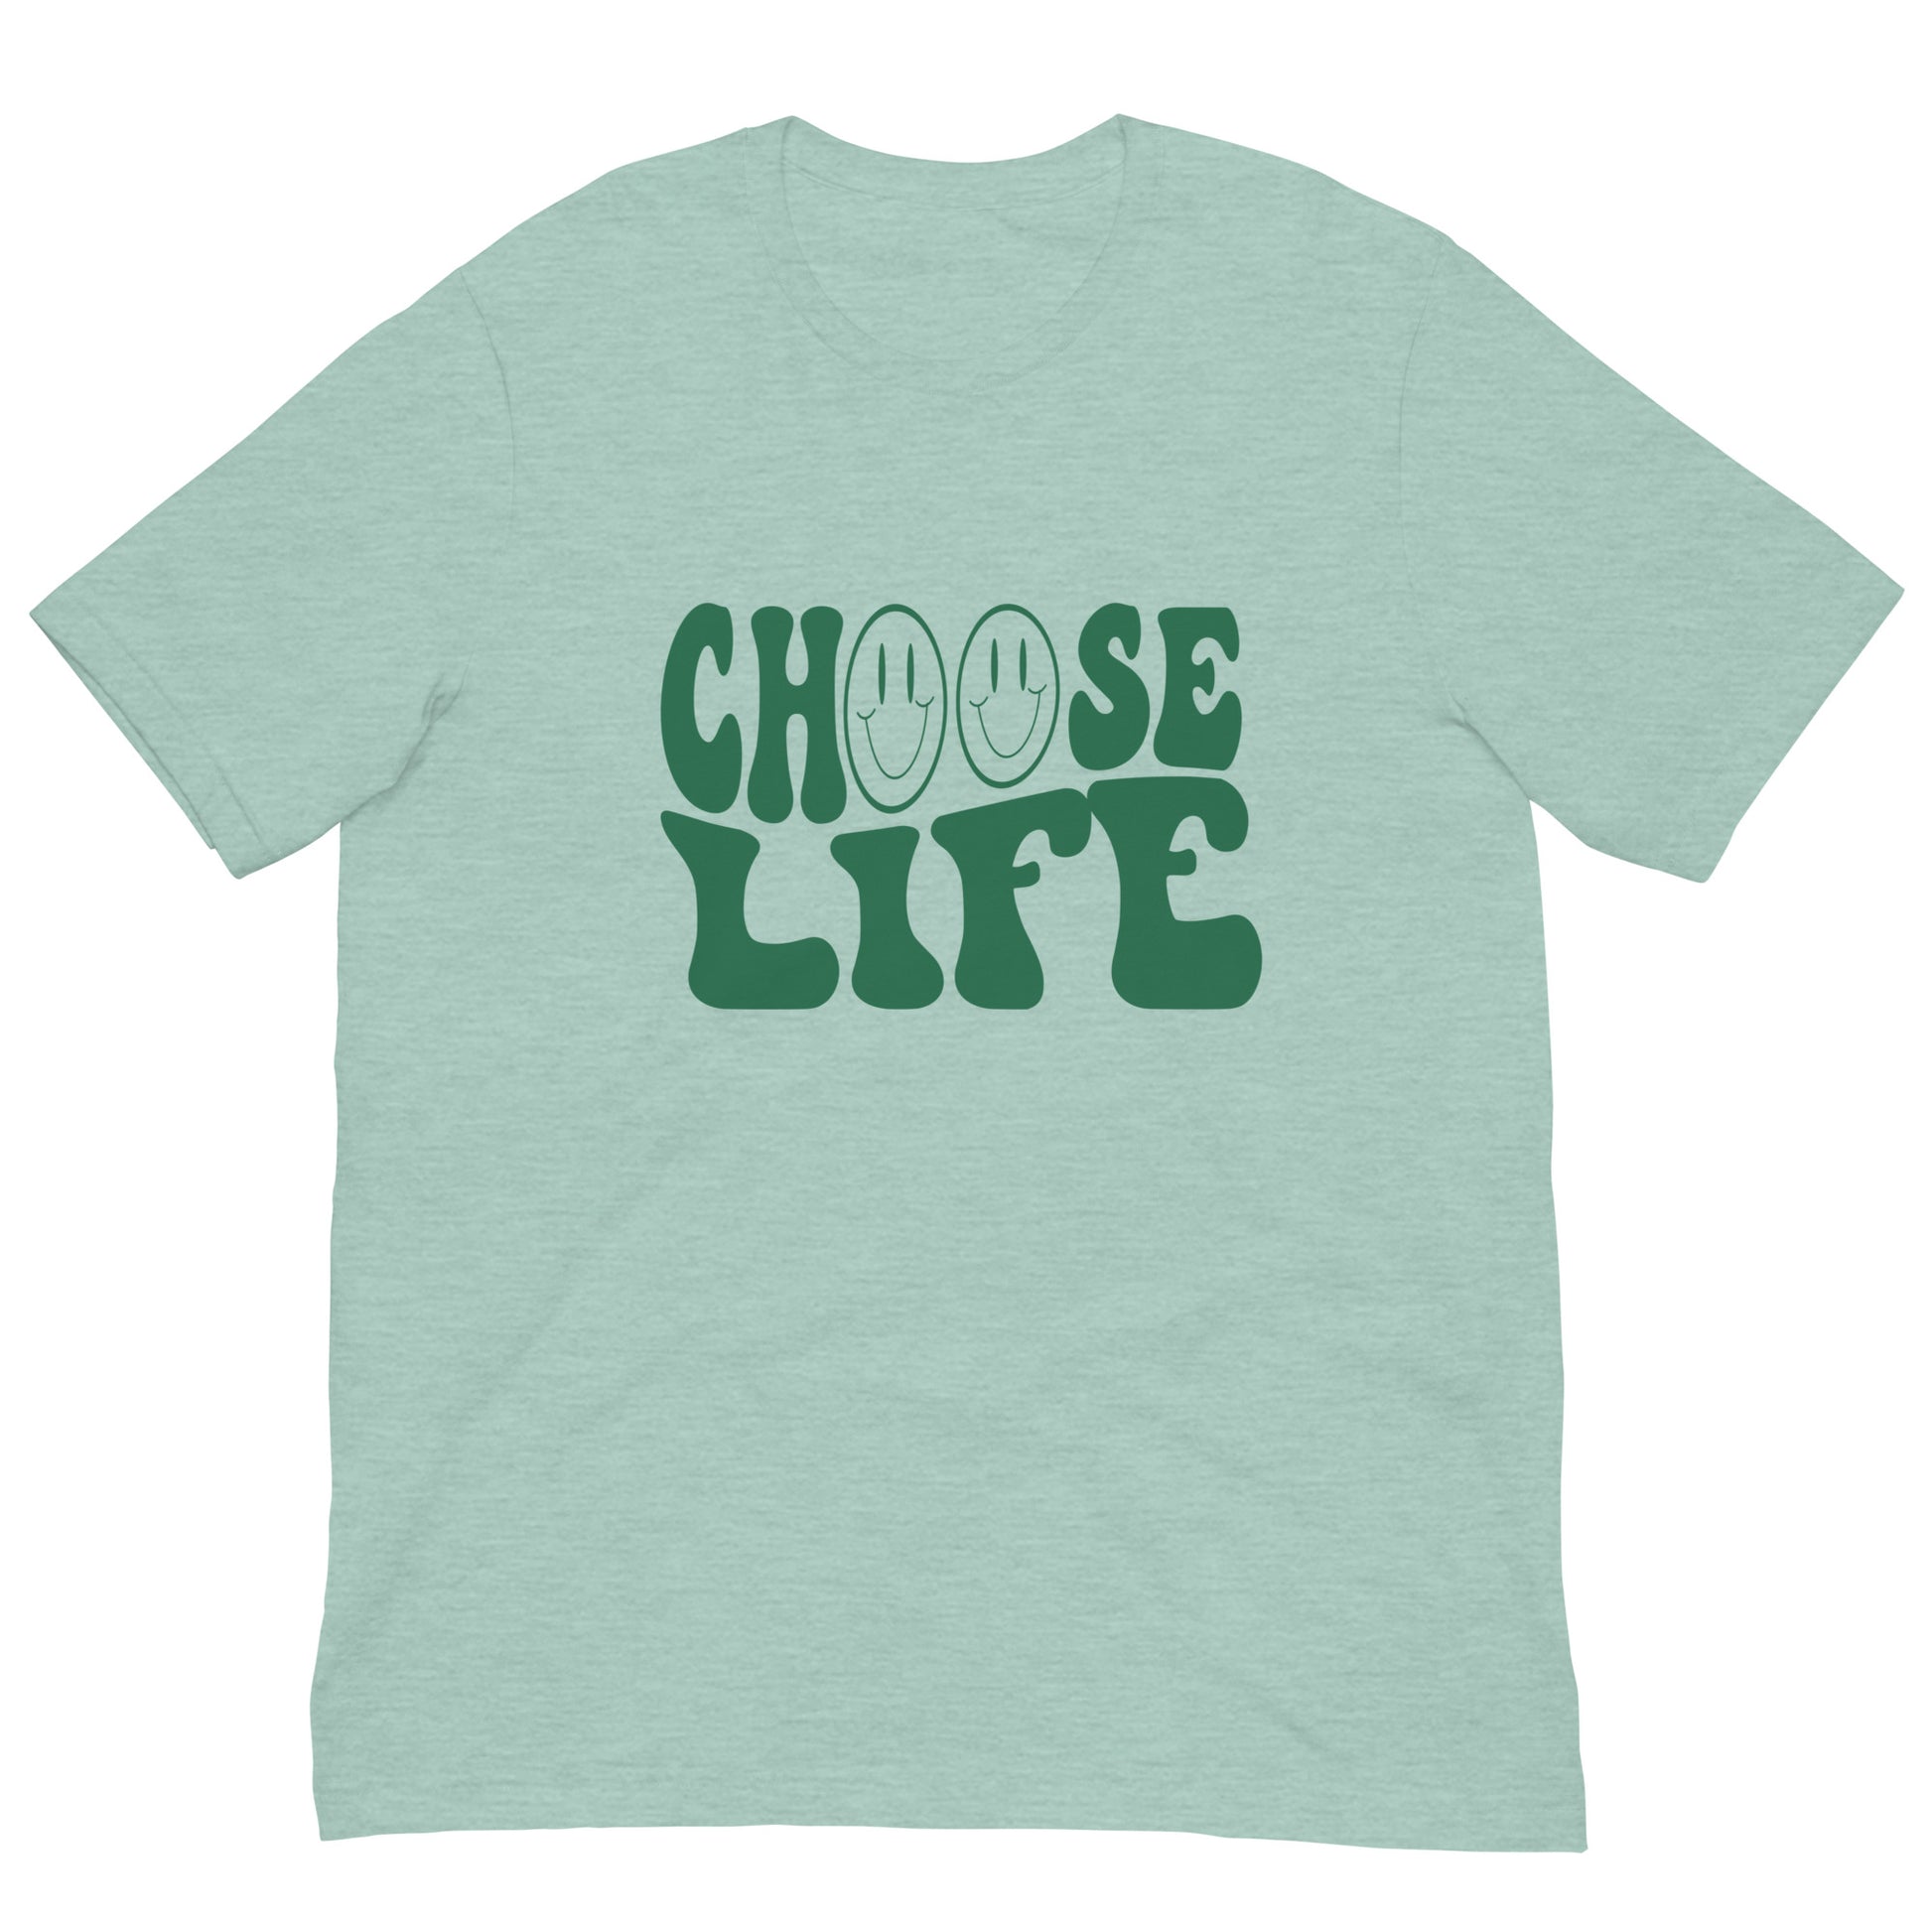 Choose Life T-shirt  in heather prism dusty blue with green lettering